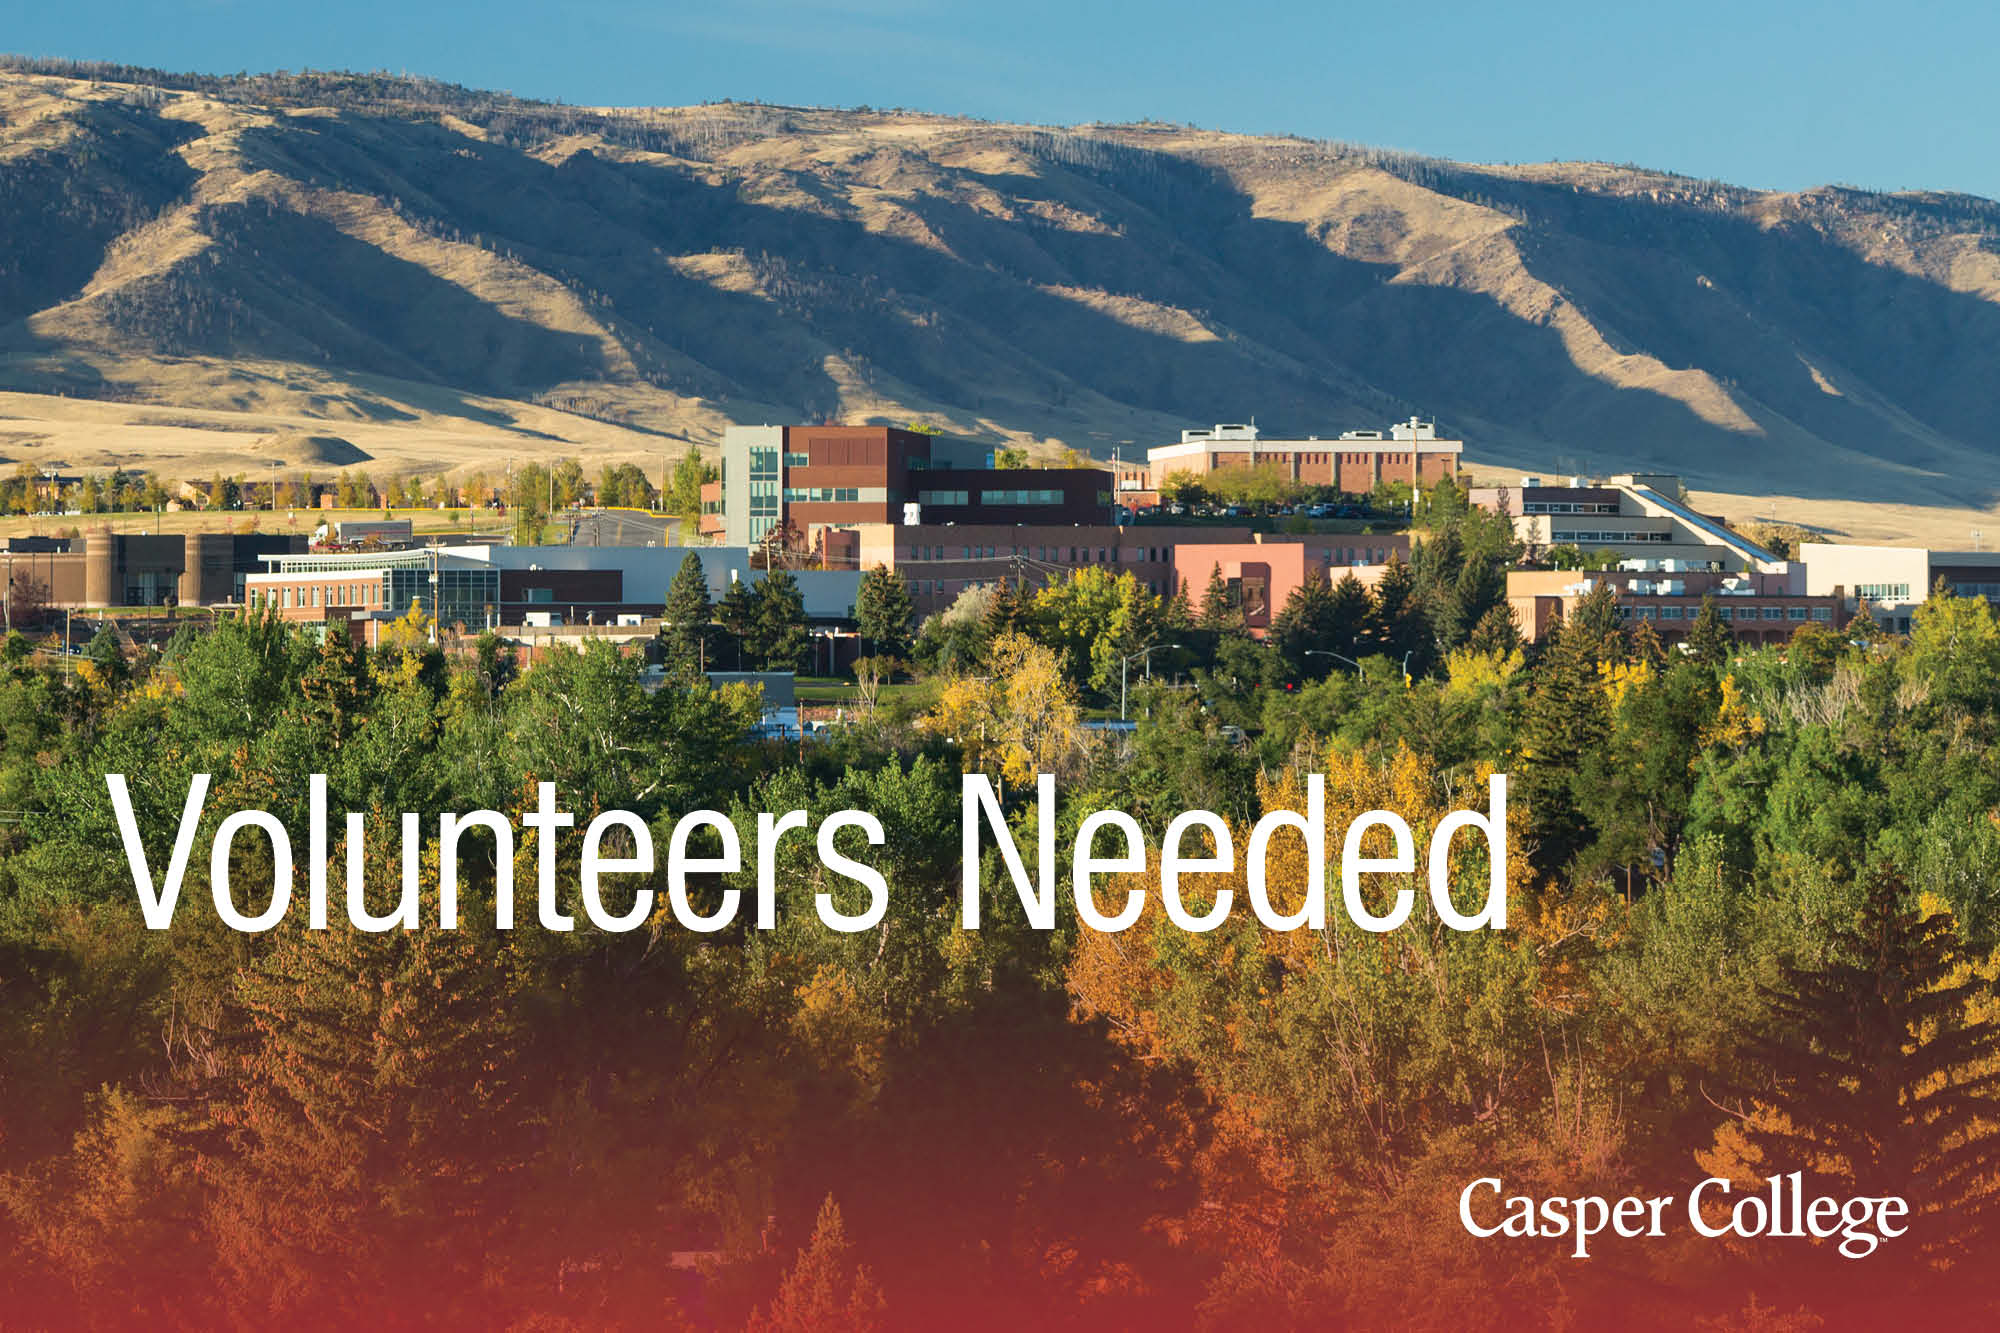 Image with the words "Volunteers Needed."